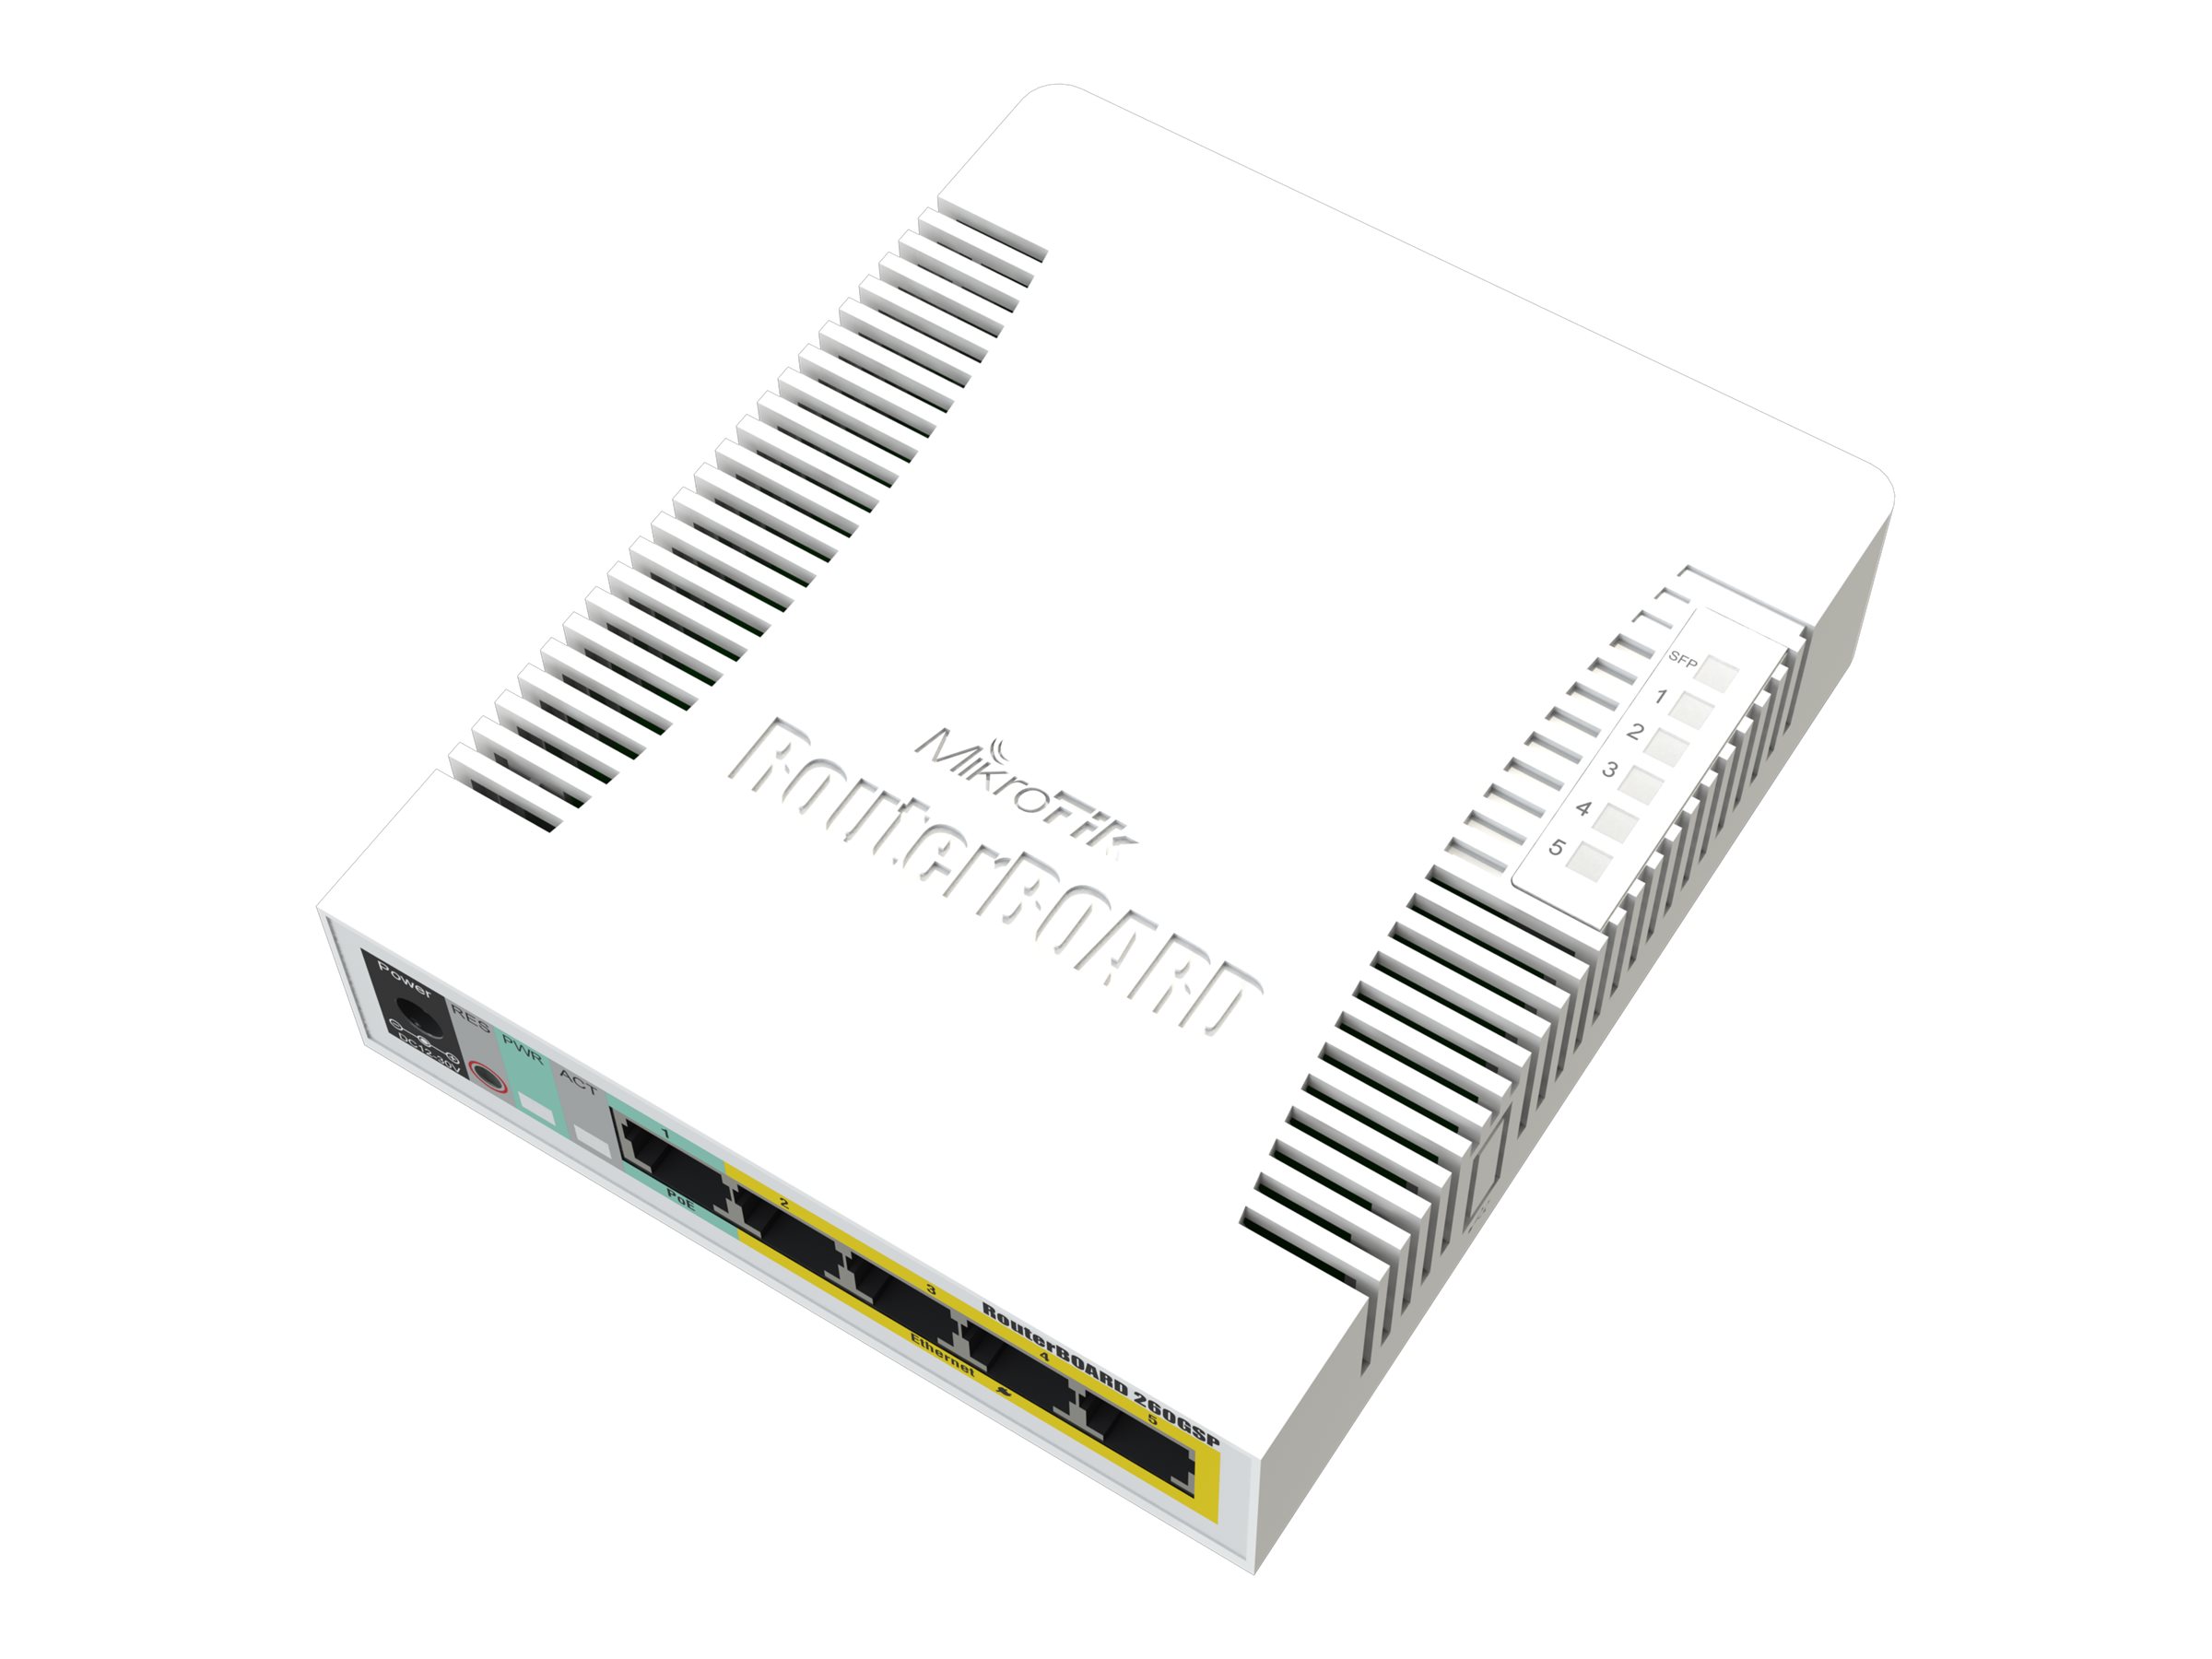 MikroTik RouterBOARD RB260GSP - Switch - managed - 5 x 10/100/1000 (4 PoE)